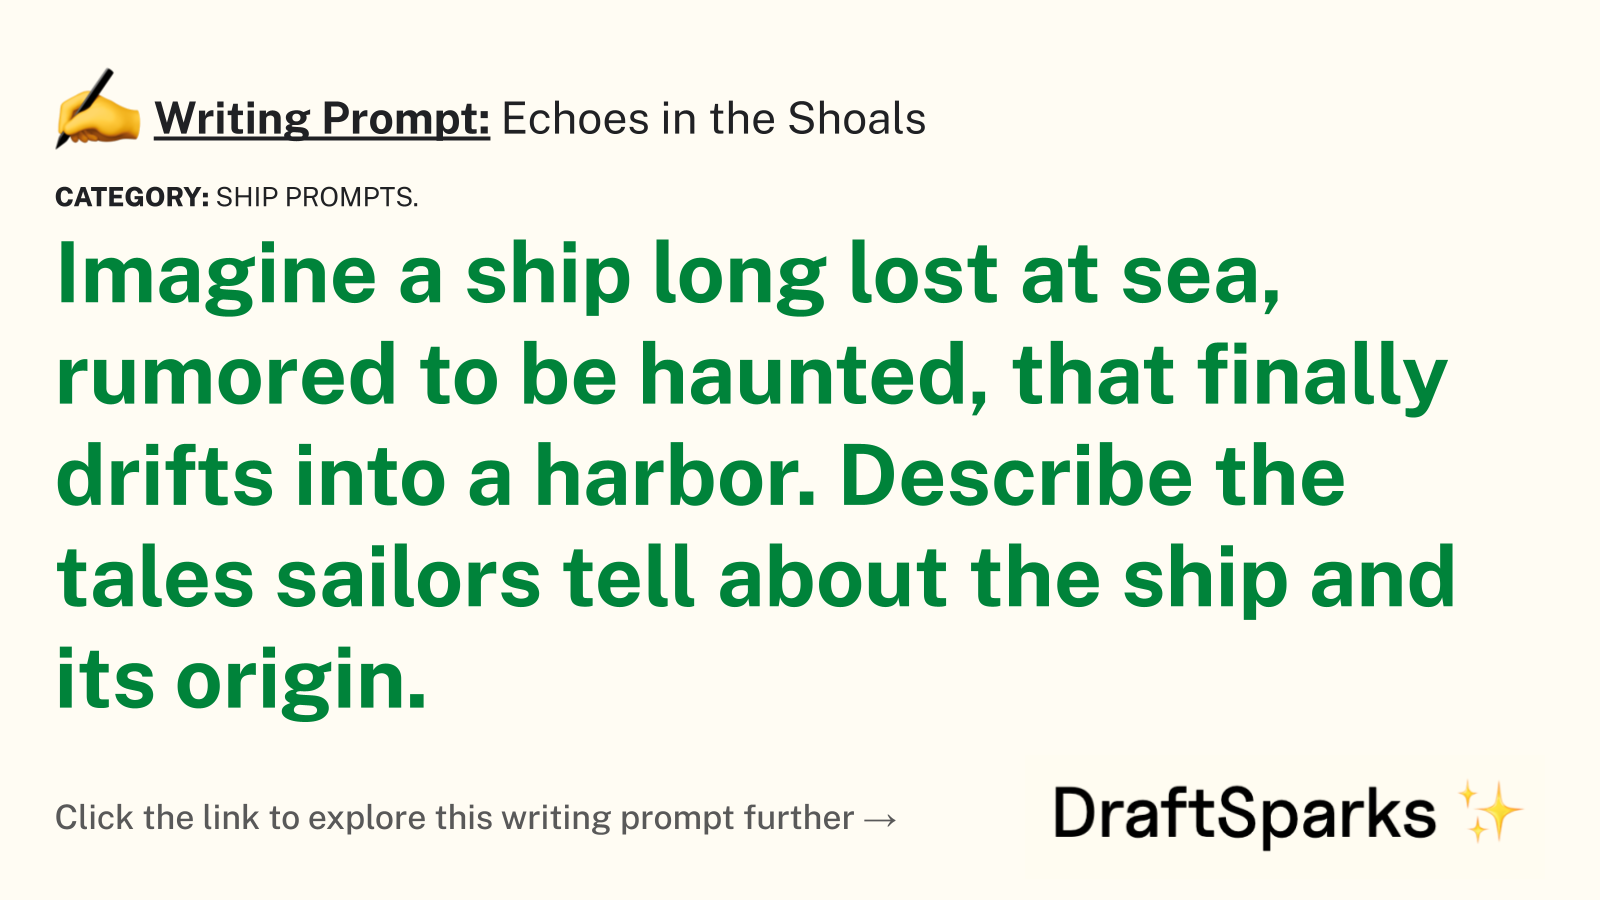 Echoes in the Shoals